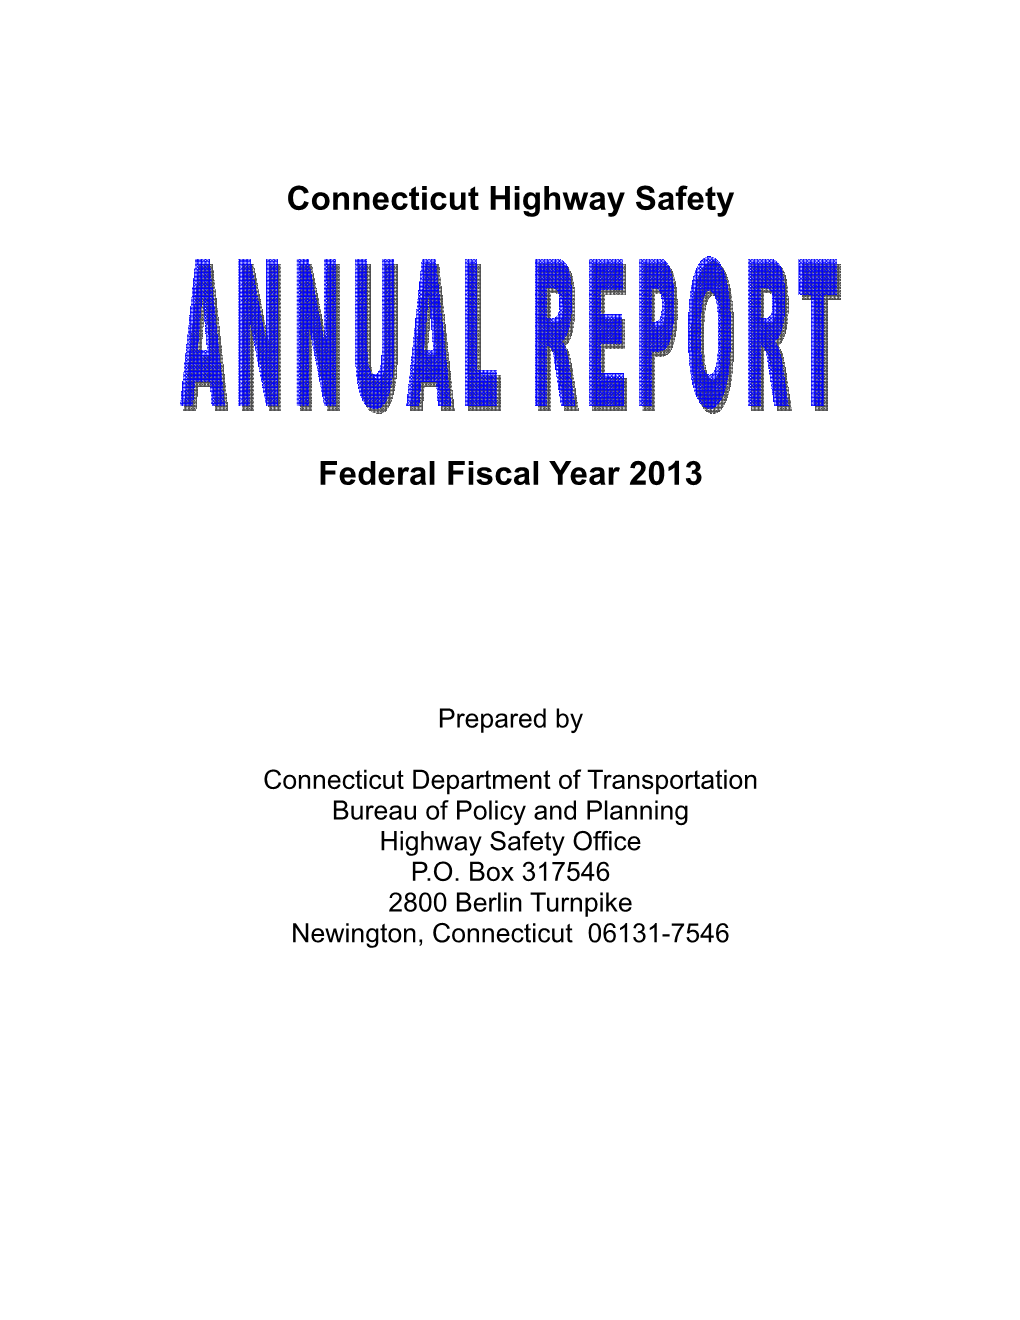 Connecticut Highway Safety Federal Fiscal Year 2013